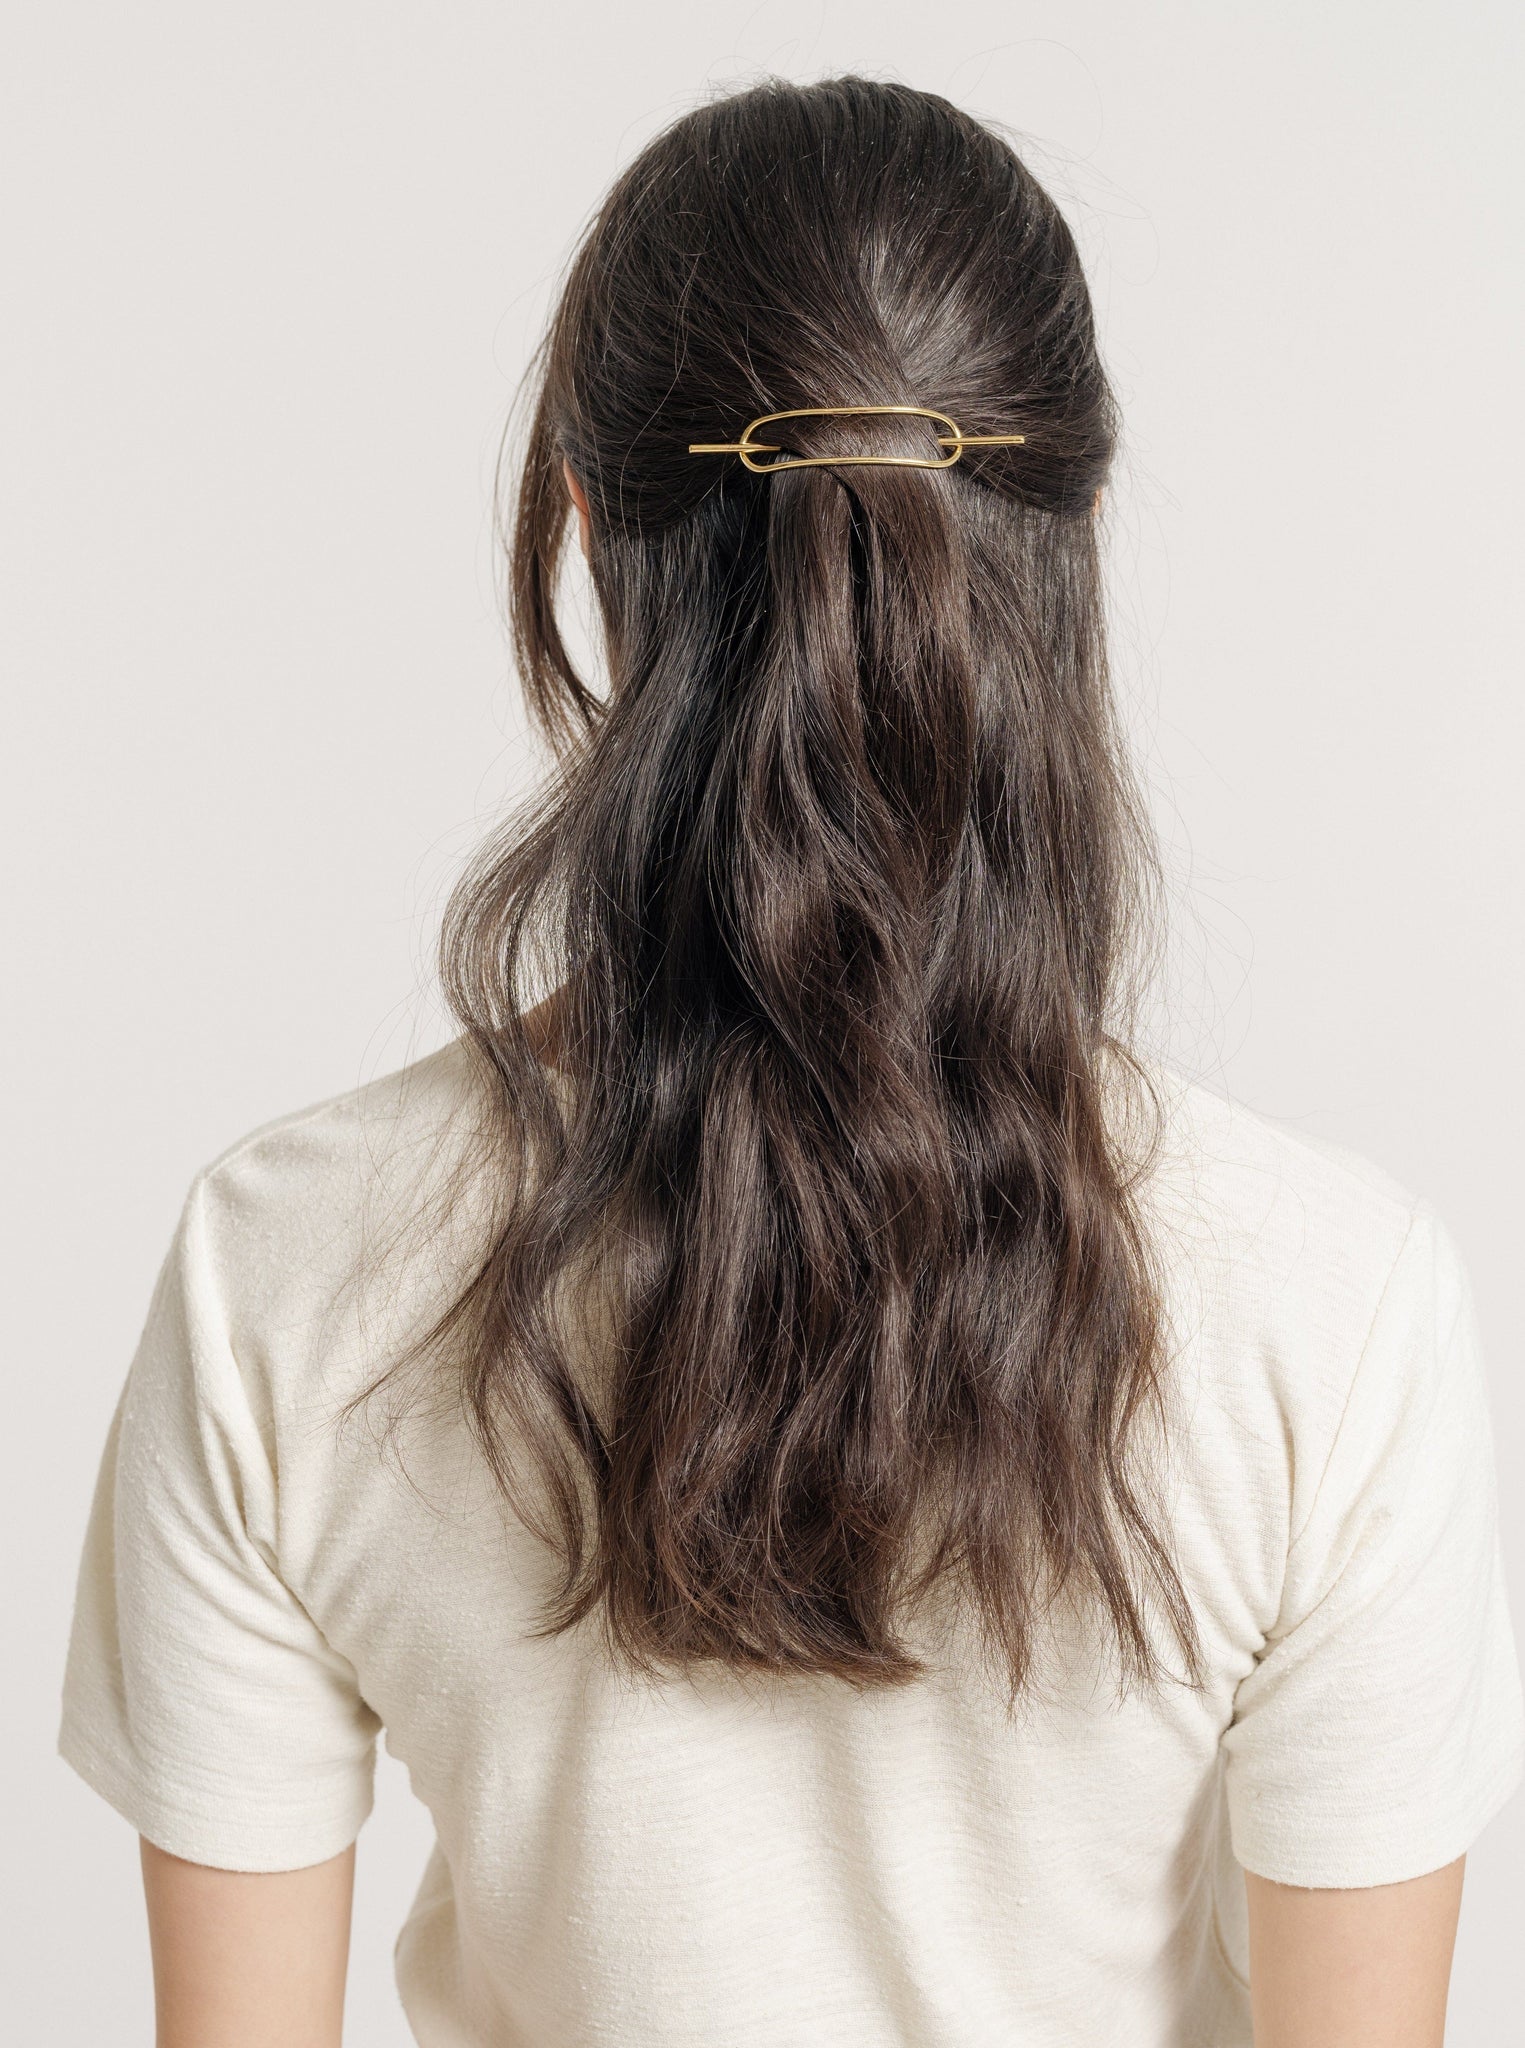 The back view of a woman wearing a Petite Oval Hair Pin in a half-up style.